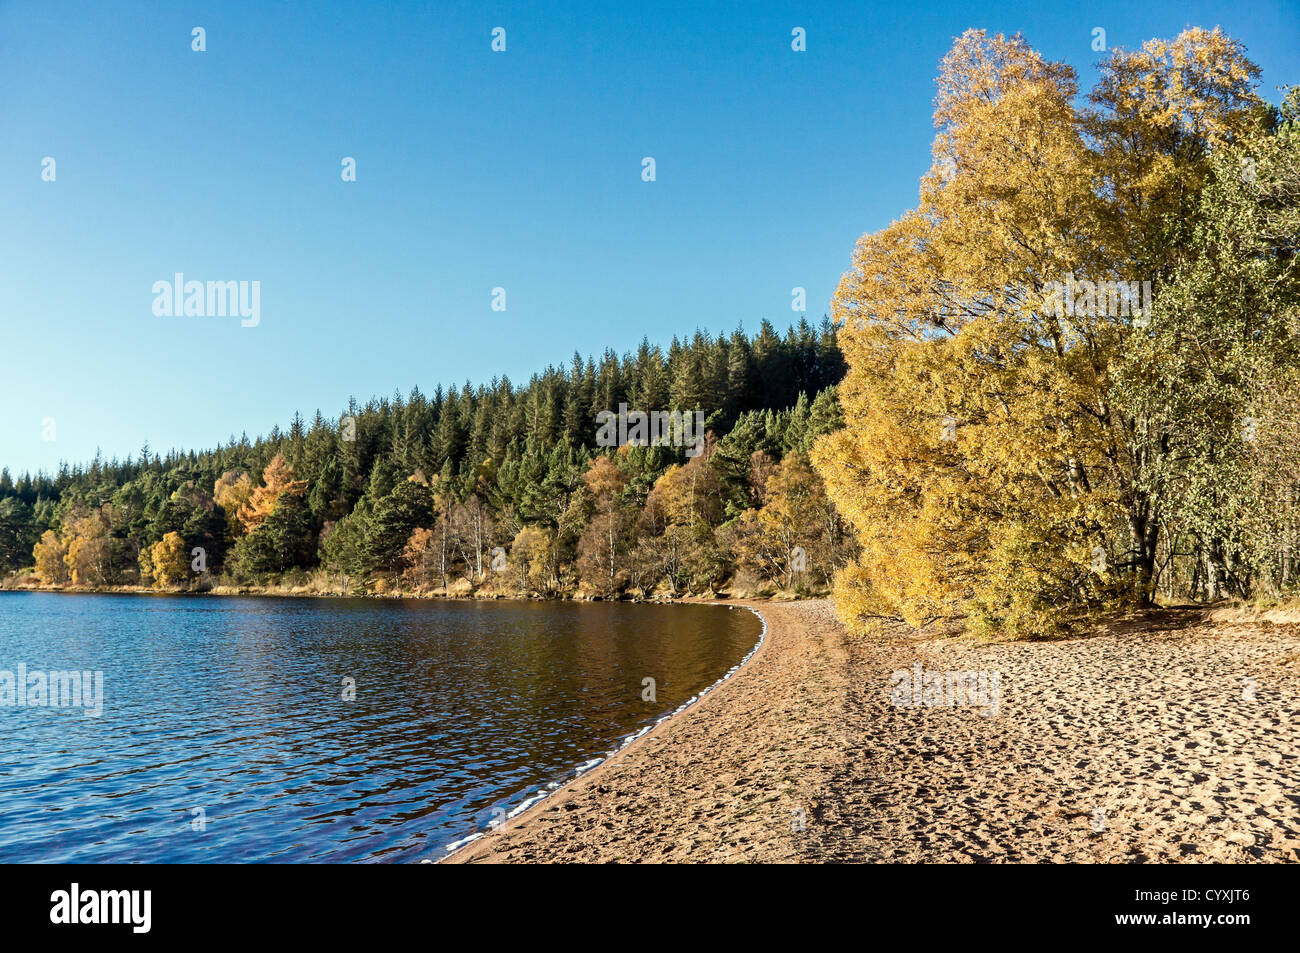 Loch Morlich and beach in the Cairngorms region of Scotland on a calm and sunny autumn day Stock Photo